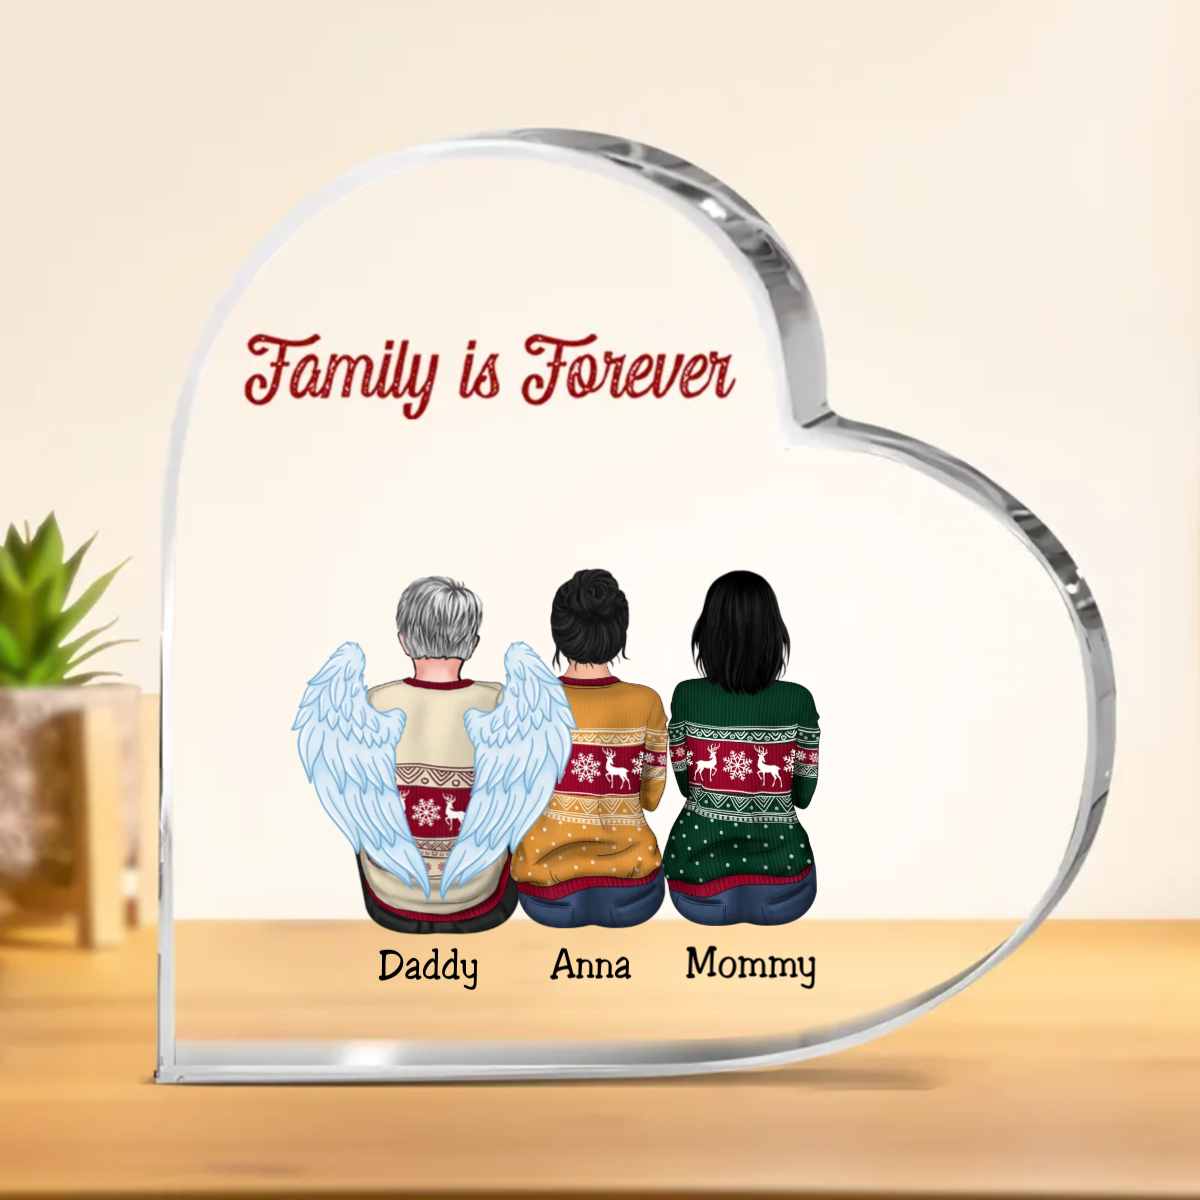 Discover Family - Family Is Forever - Personalized Acrylic Plaque